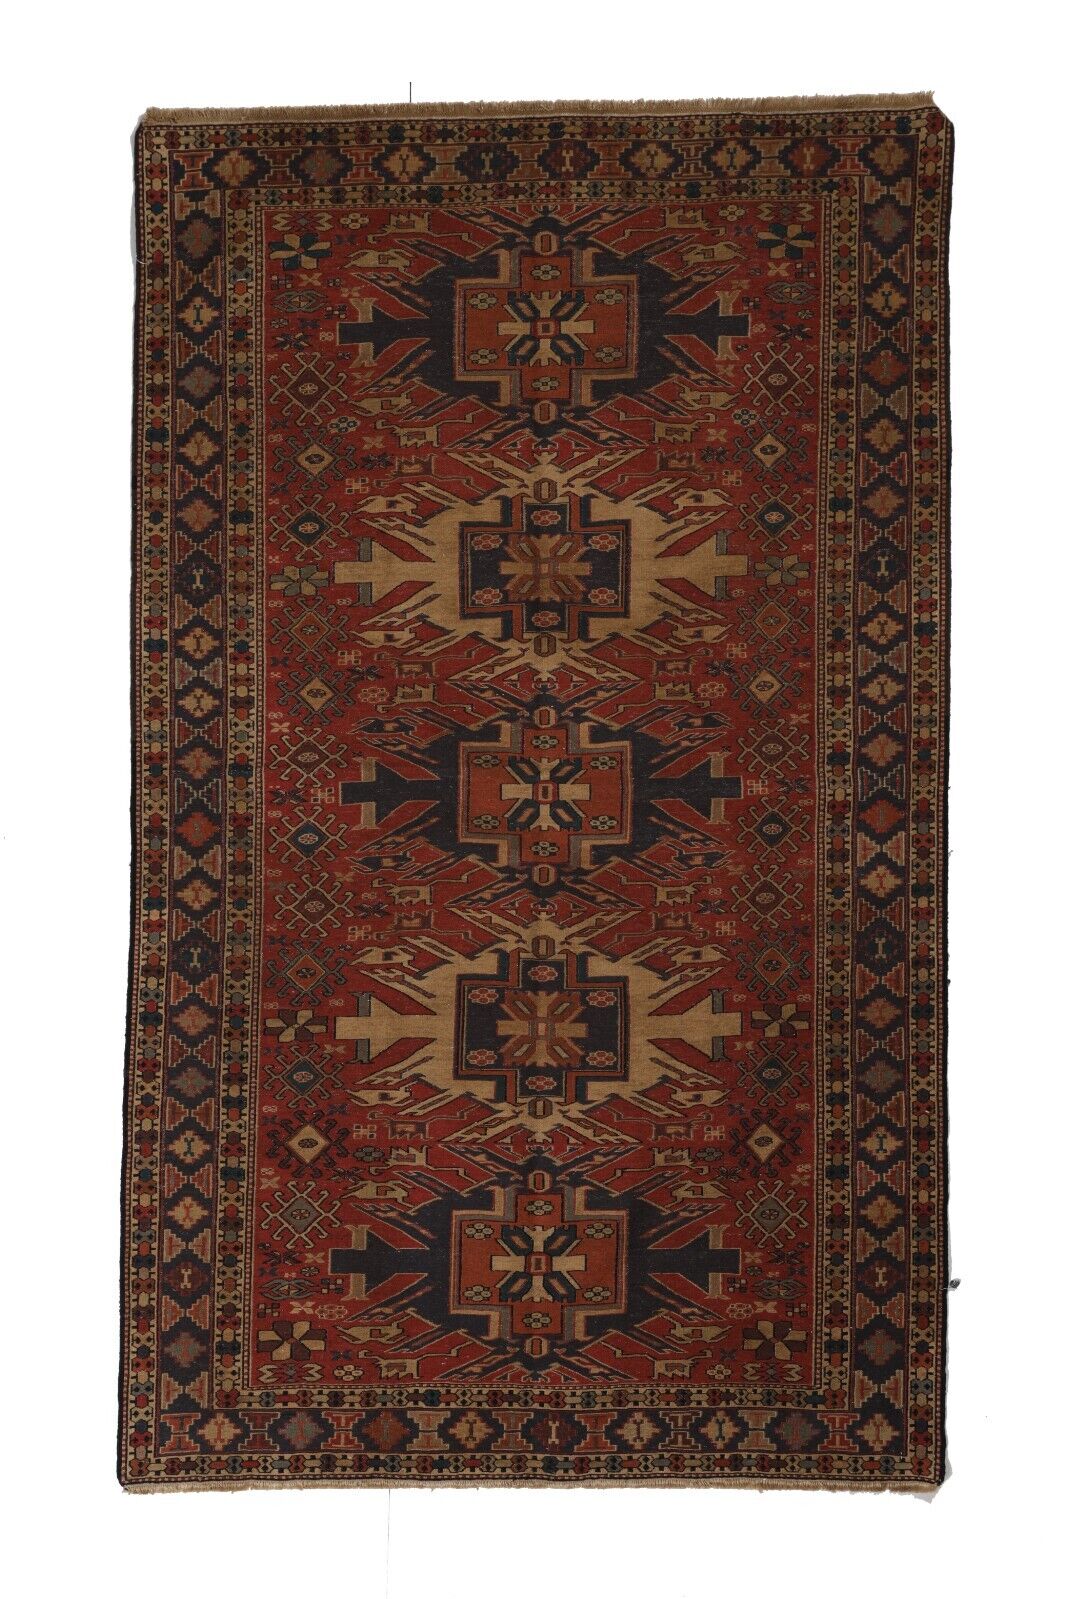 Handmade Shahsavan Rug Made with Natural Materials, Stand Out with Unique Design